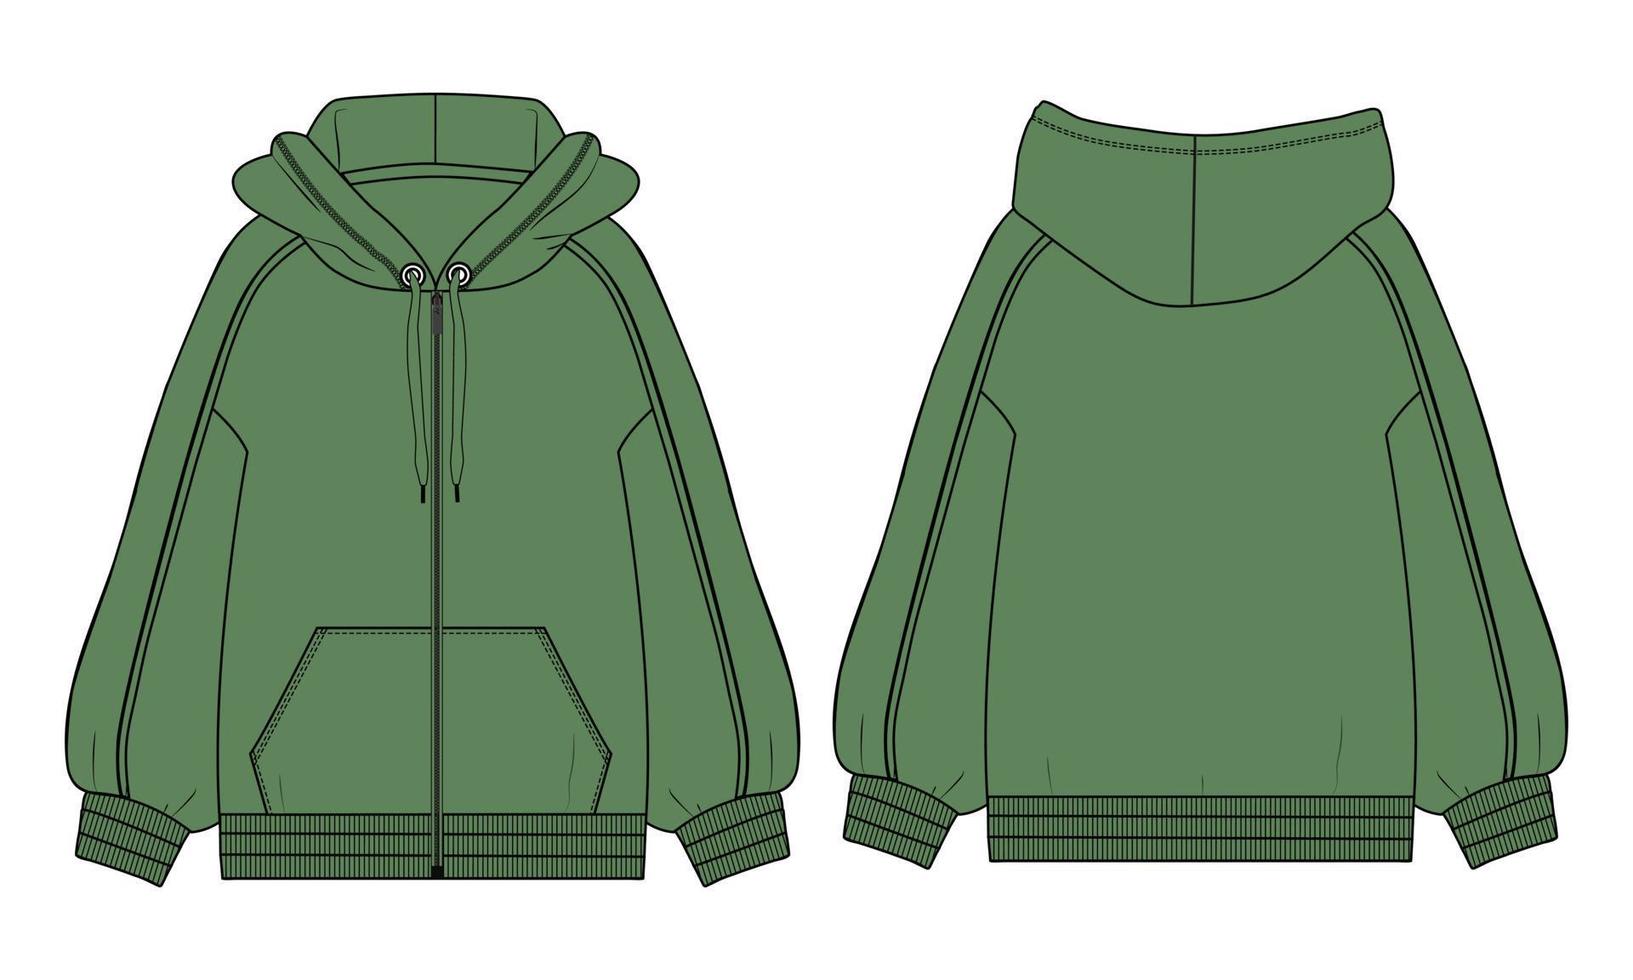 Long sleeve Hoodie technical fashion flat sketch vector illustration Green Color template front and back views.